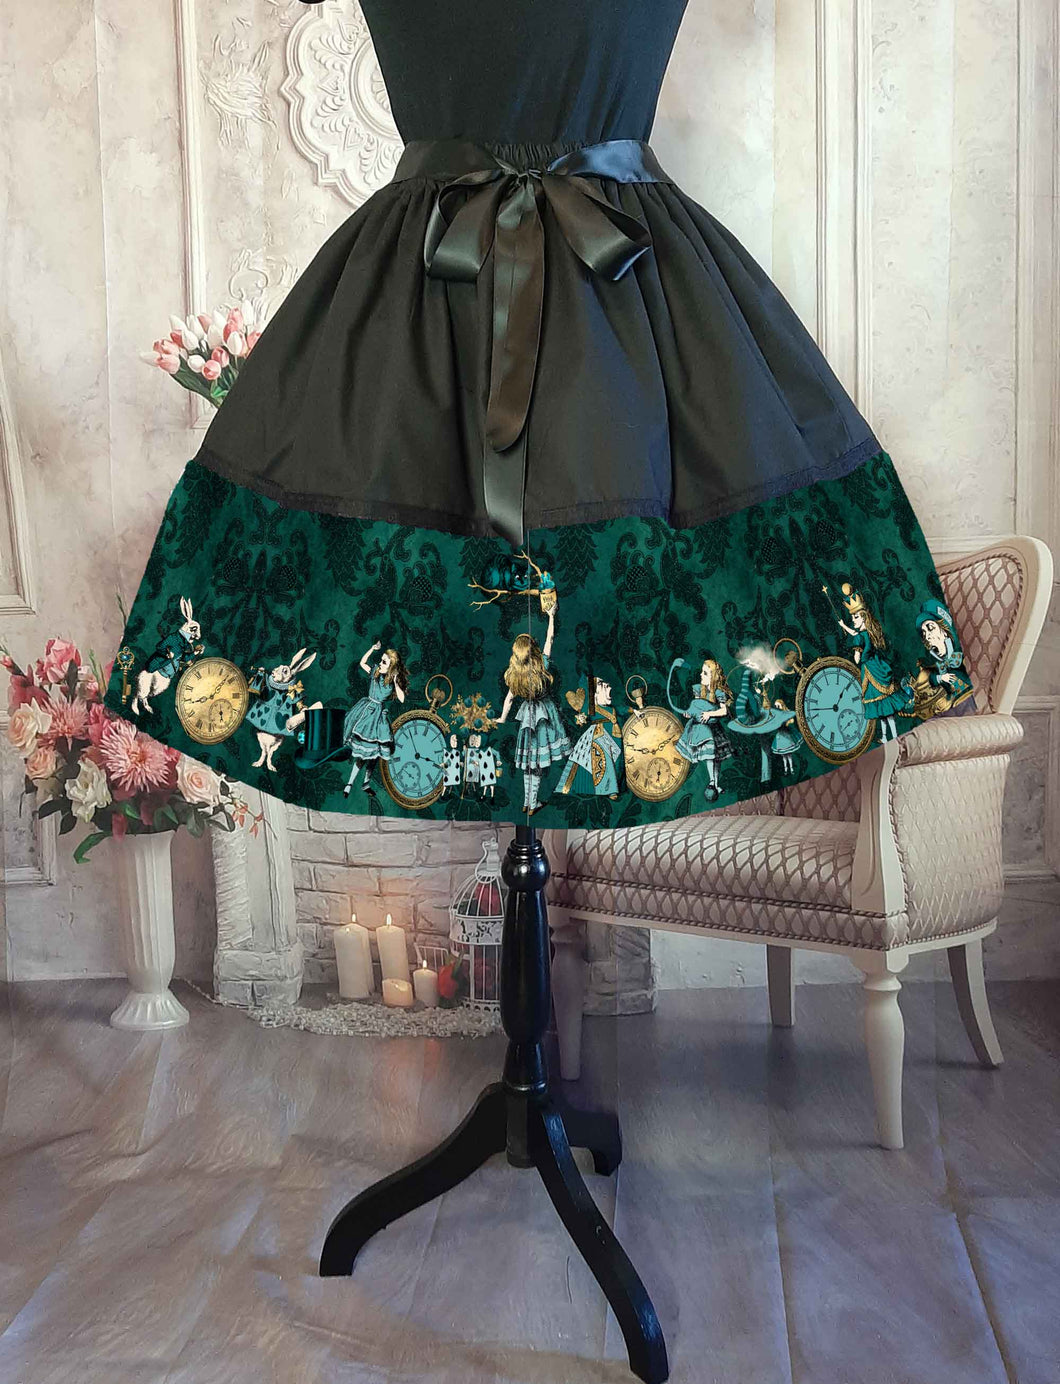 alice in wonderland full 50's style knee length skirt.  Dark bottle green and black with Alice characters in green and gold.  Adjustable waist up to 50 inches, suitable for plus sizes 